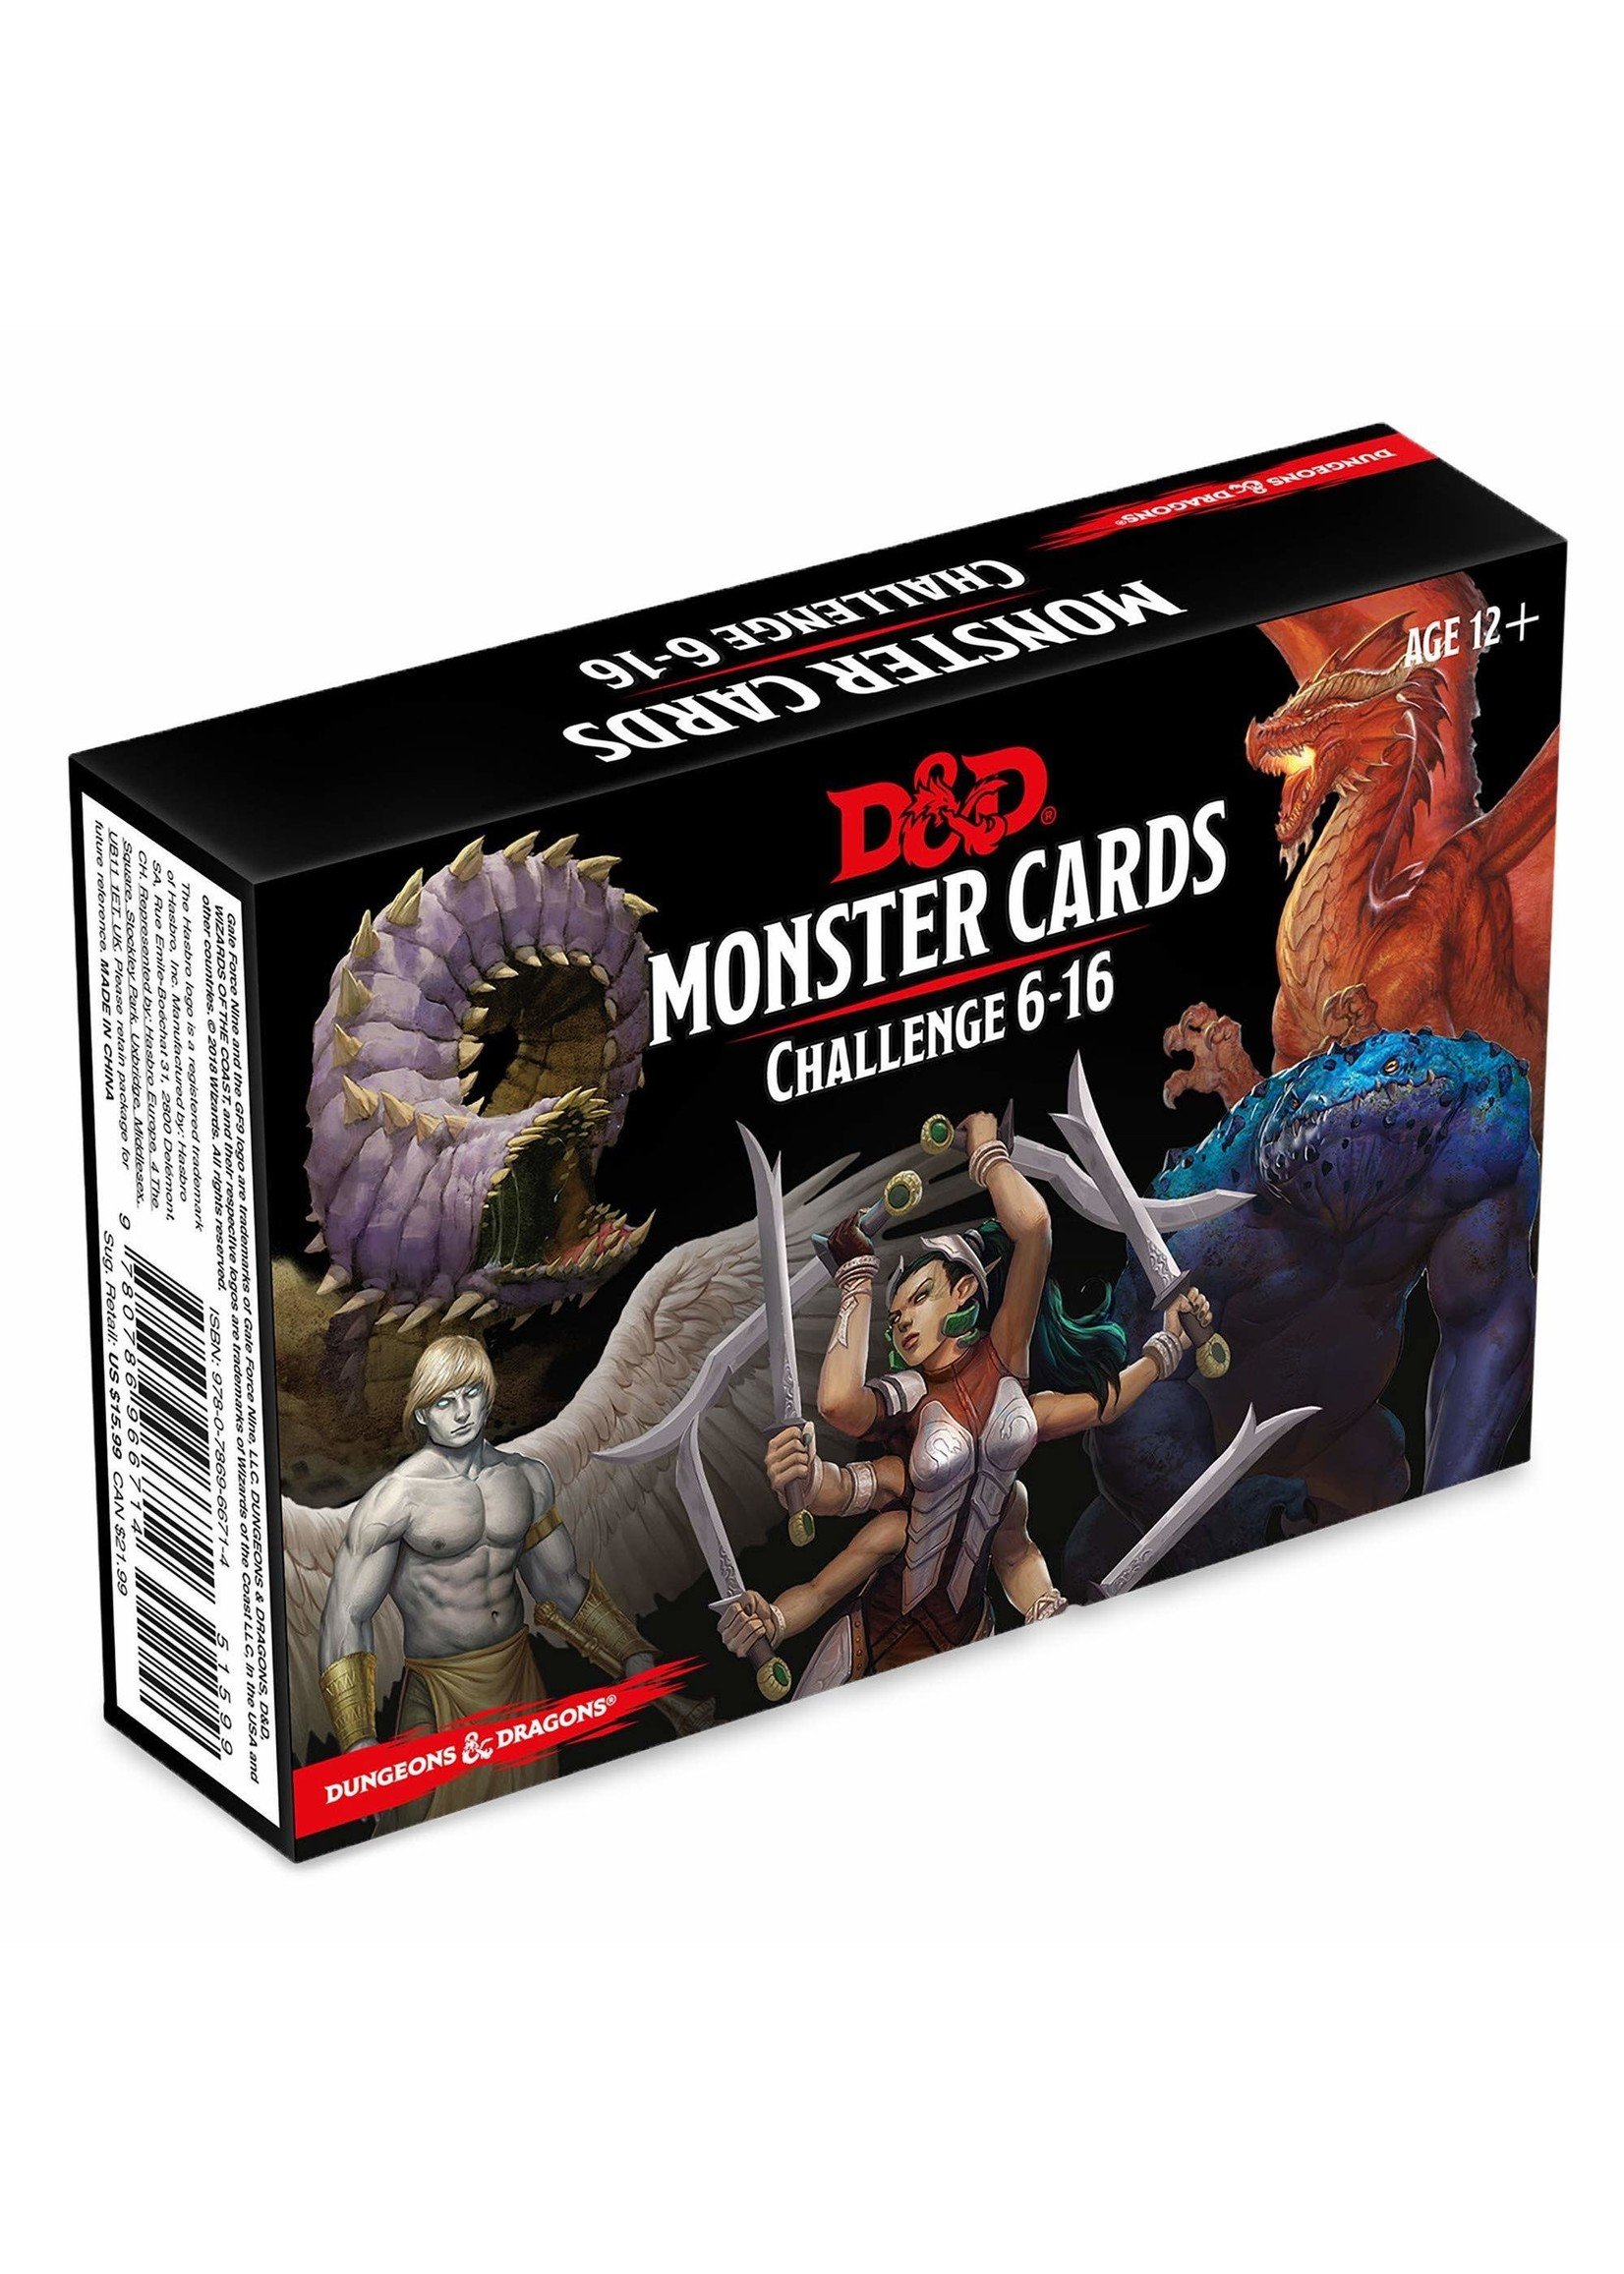 Dungeons & Dragons D&D Monster cards challenge 6-16